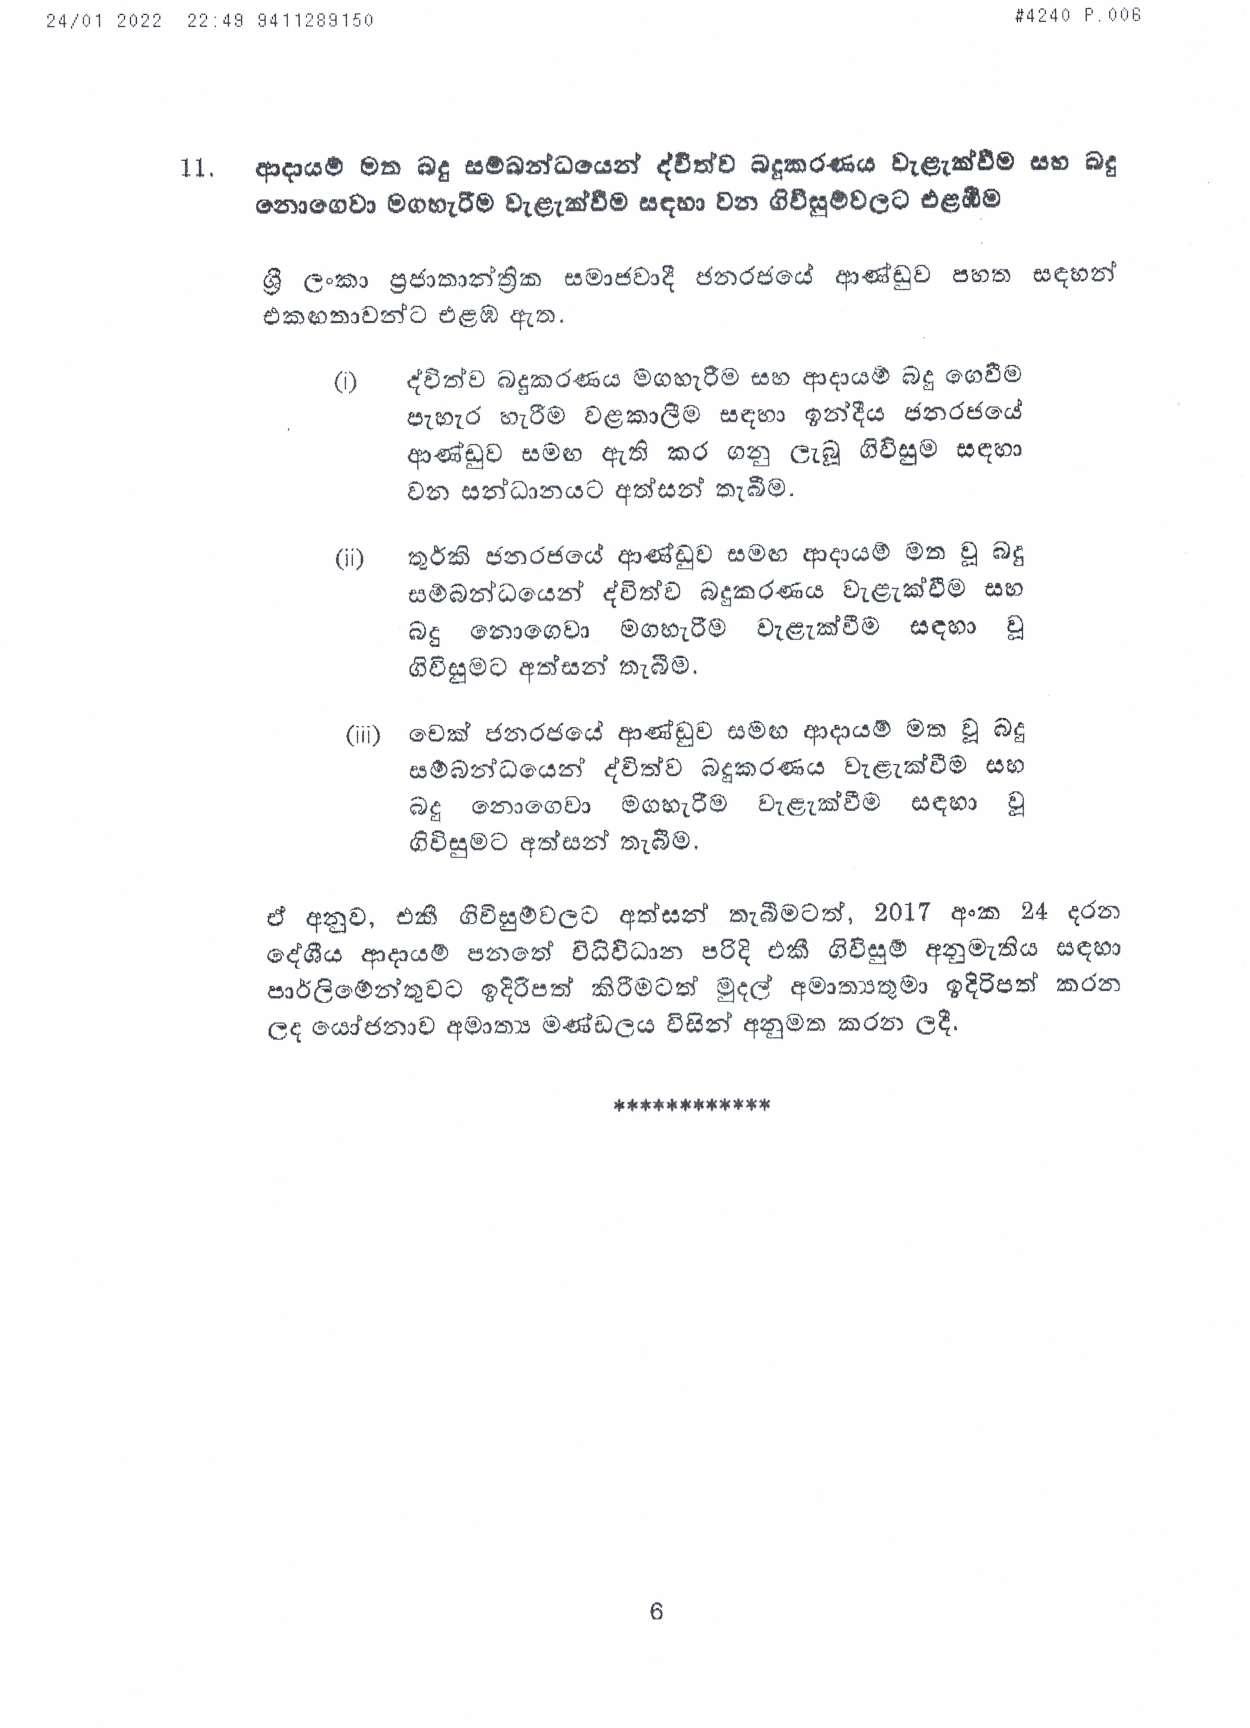 Cabinet Decision on 24.01.2022 page 006